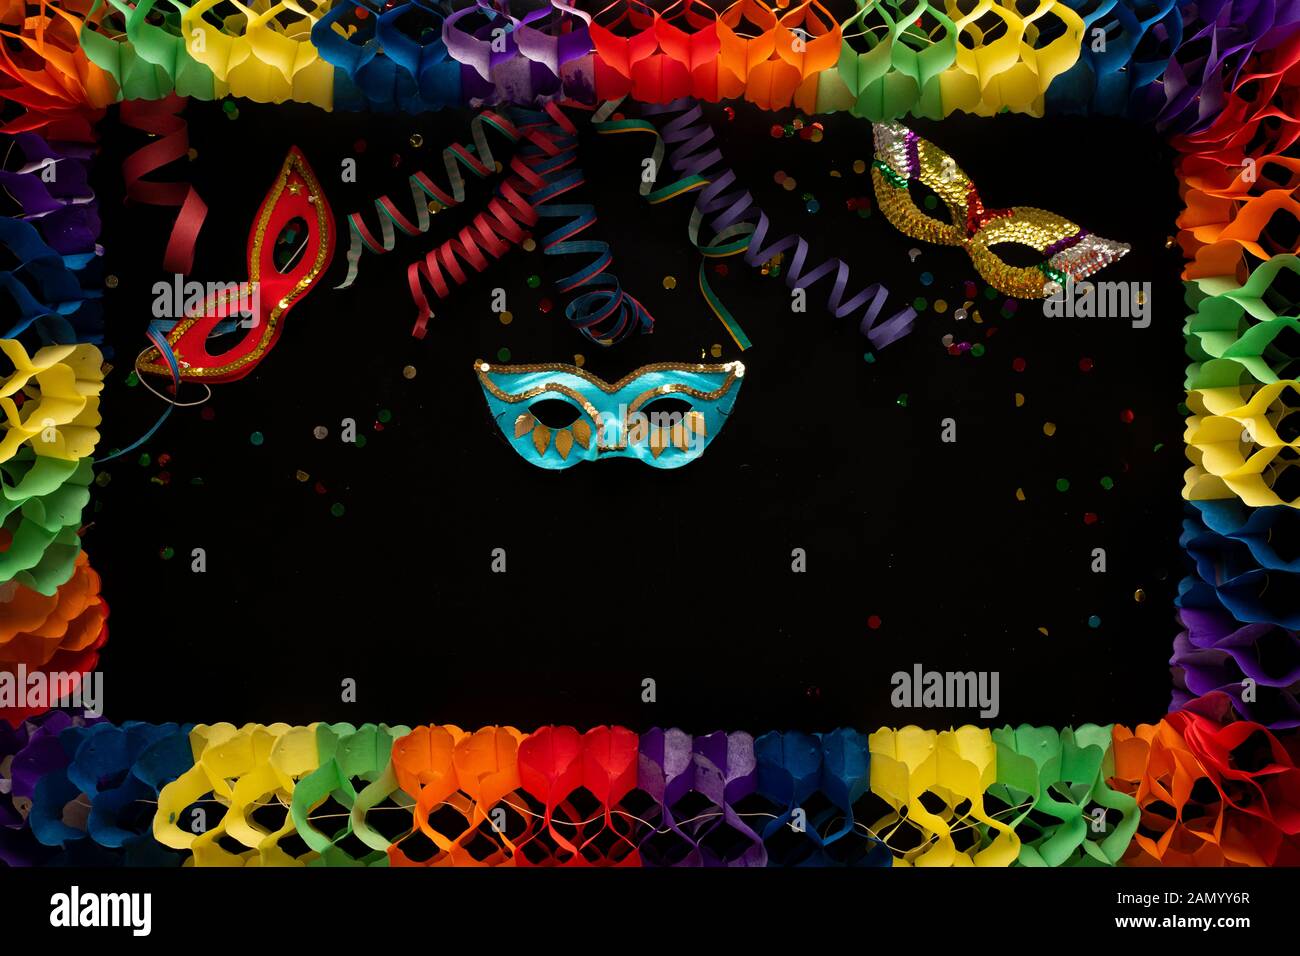 Carnival objects on a black background. Coiled streamers, confetti, horn, tambourine, balloons and many other carnival objects Stock Photo